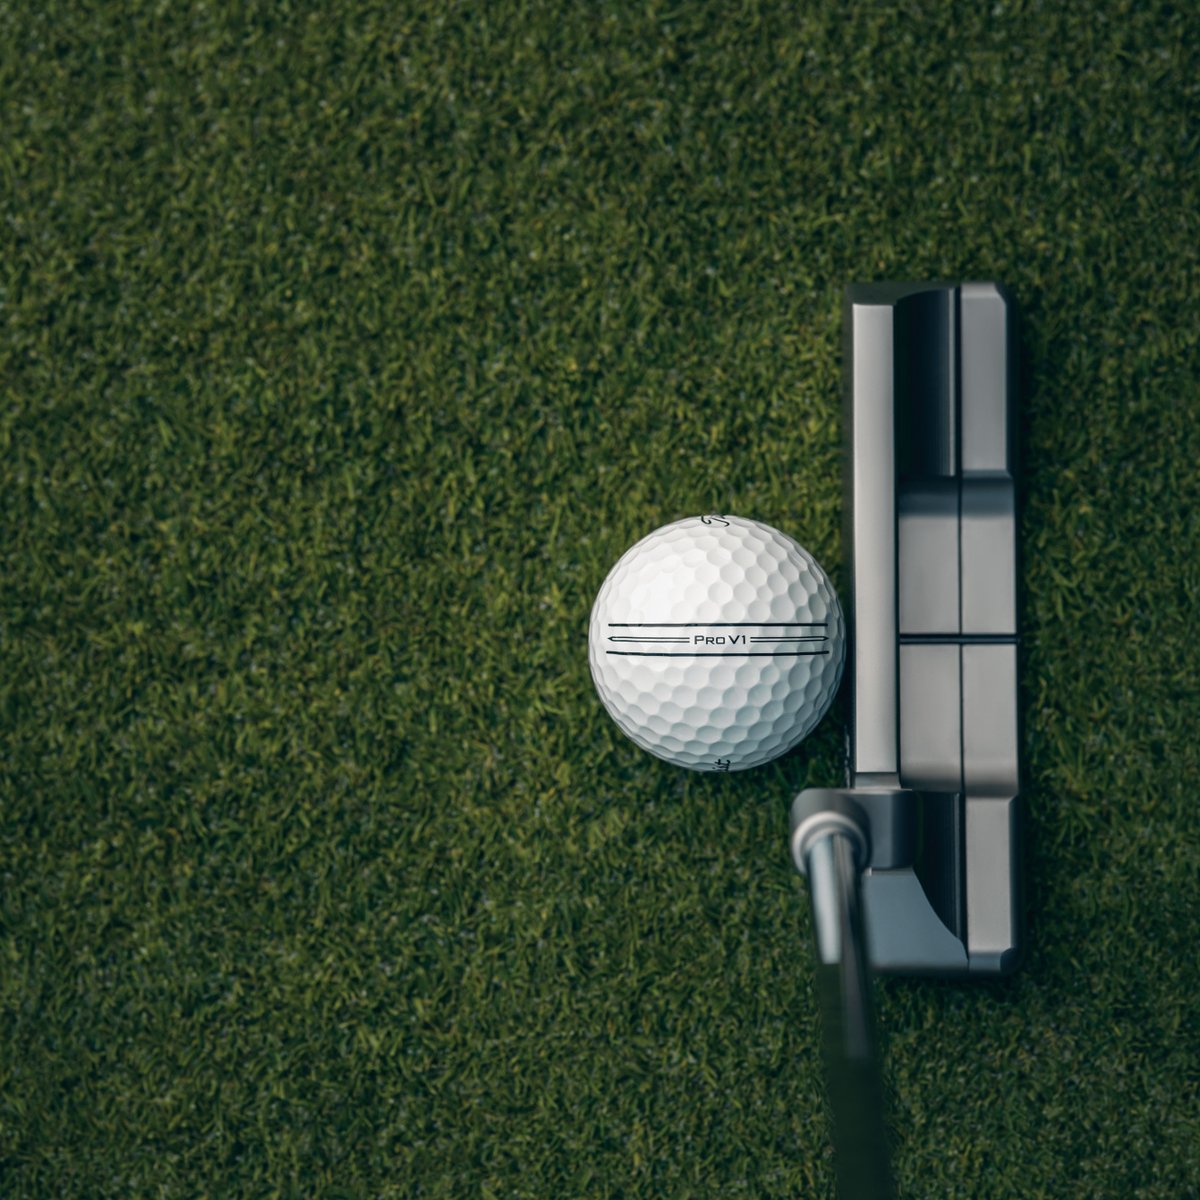 Line up with confidence. Titleist Enhanced Alignment golf balls feature a new extended sidestamp — measuring over 65 percent longer than the standard Pro V1 sidestamp — for more precise aim and accuracy. Pro V1, Pro V1x and Pro V1x Left Dash golf balls with Enhanced Alignment